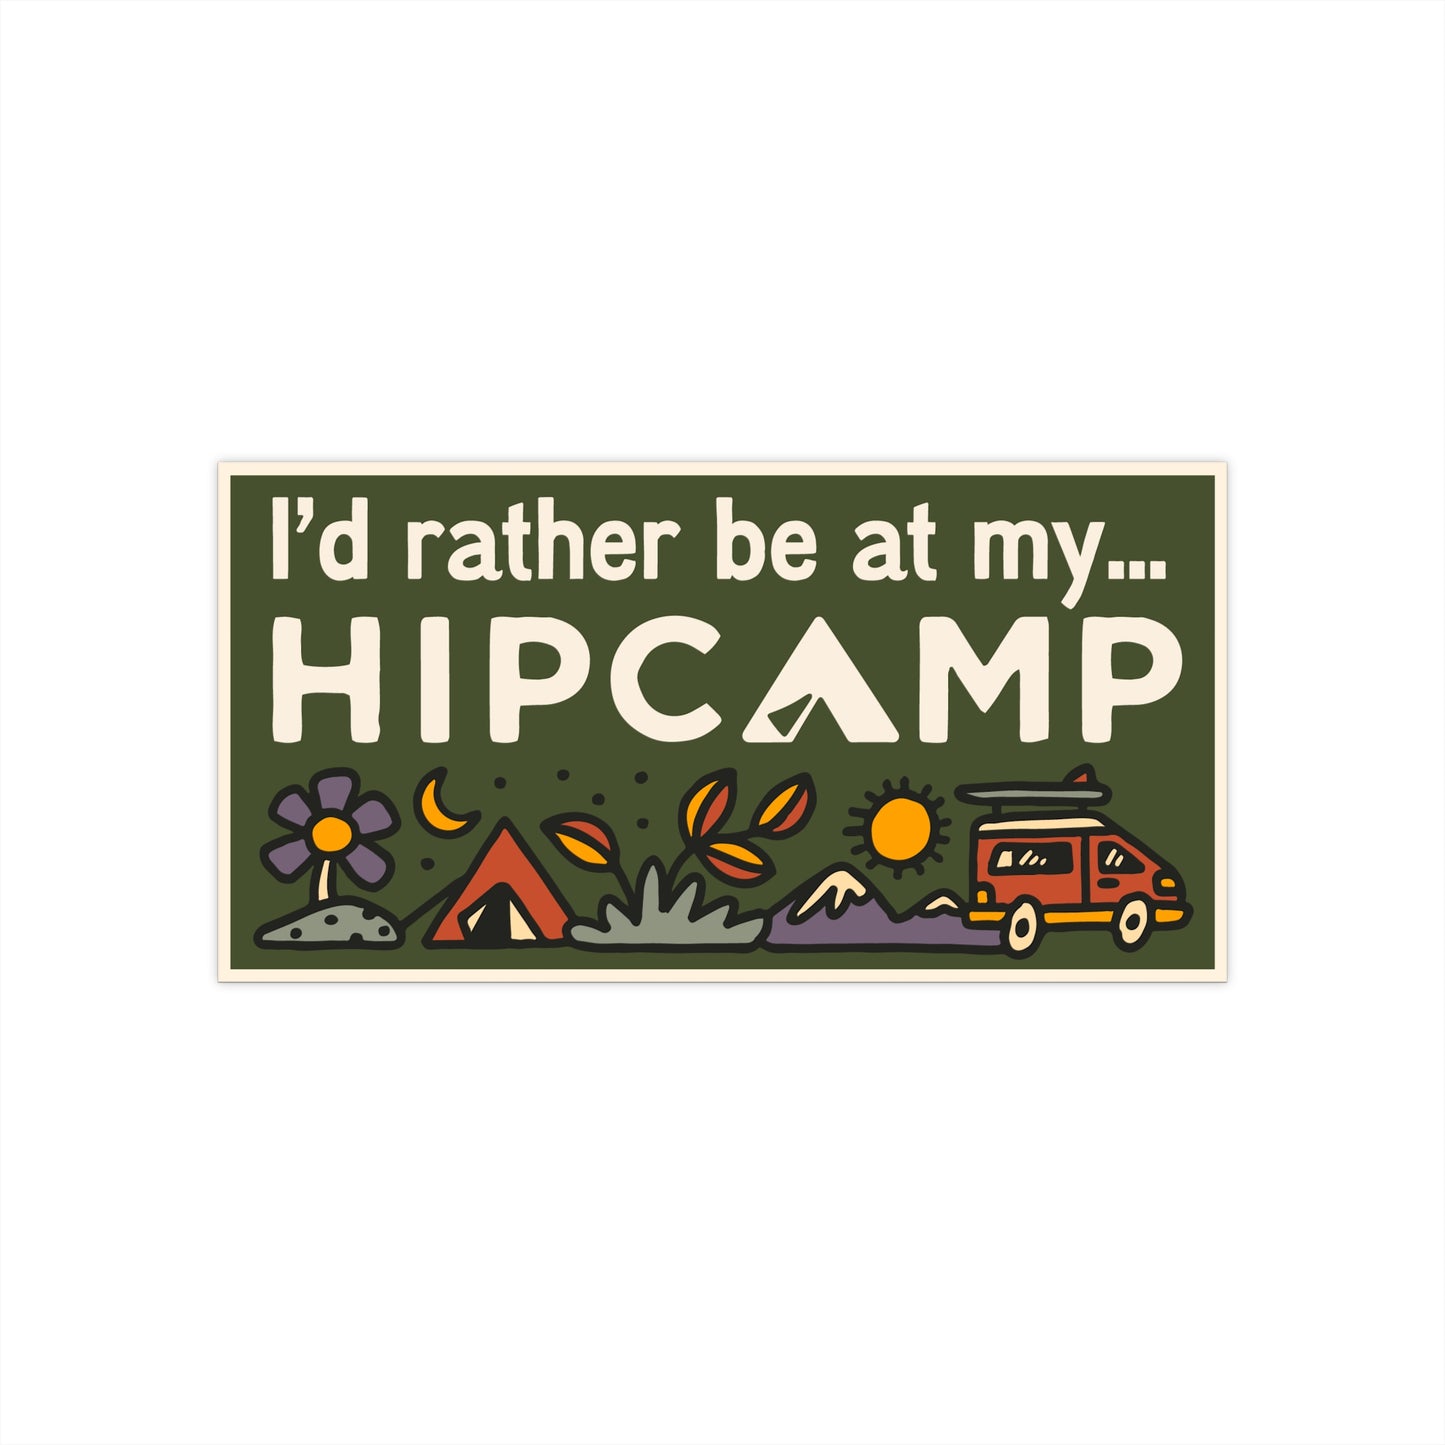 I'd rather be at my Hipcamp Bumper Sticker